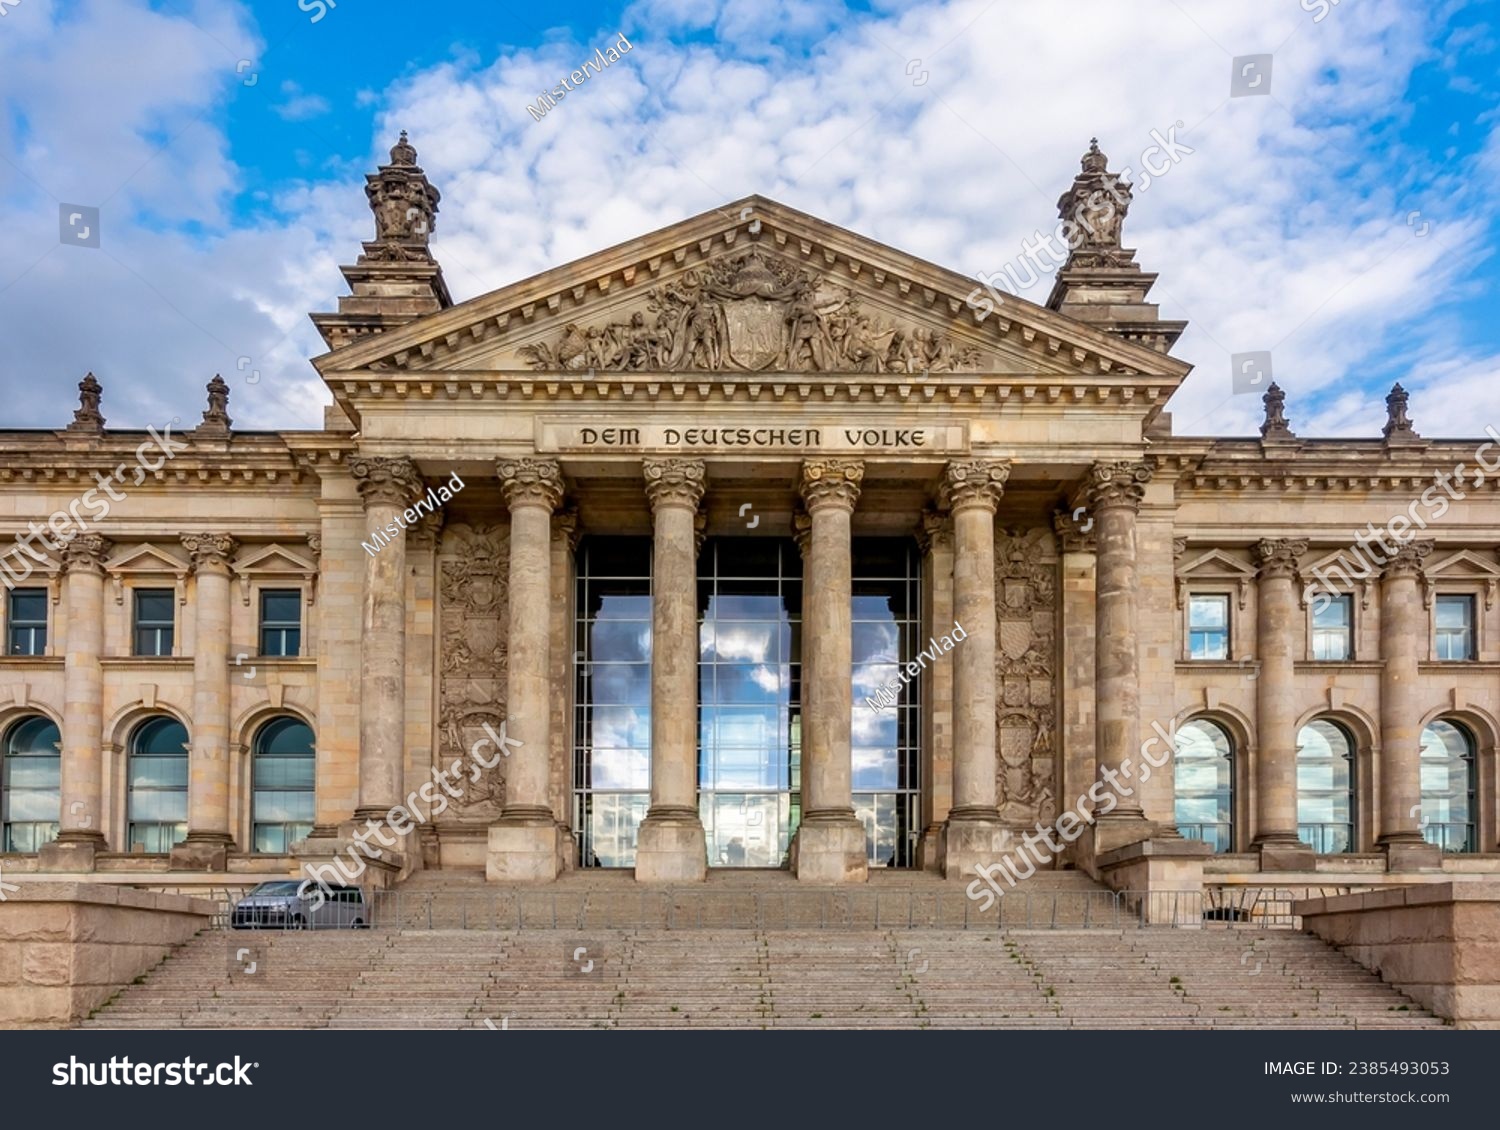 Reichstag building (Bundestag - parliament of Germany) in Berlin with translation "for German people" #2385493053